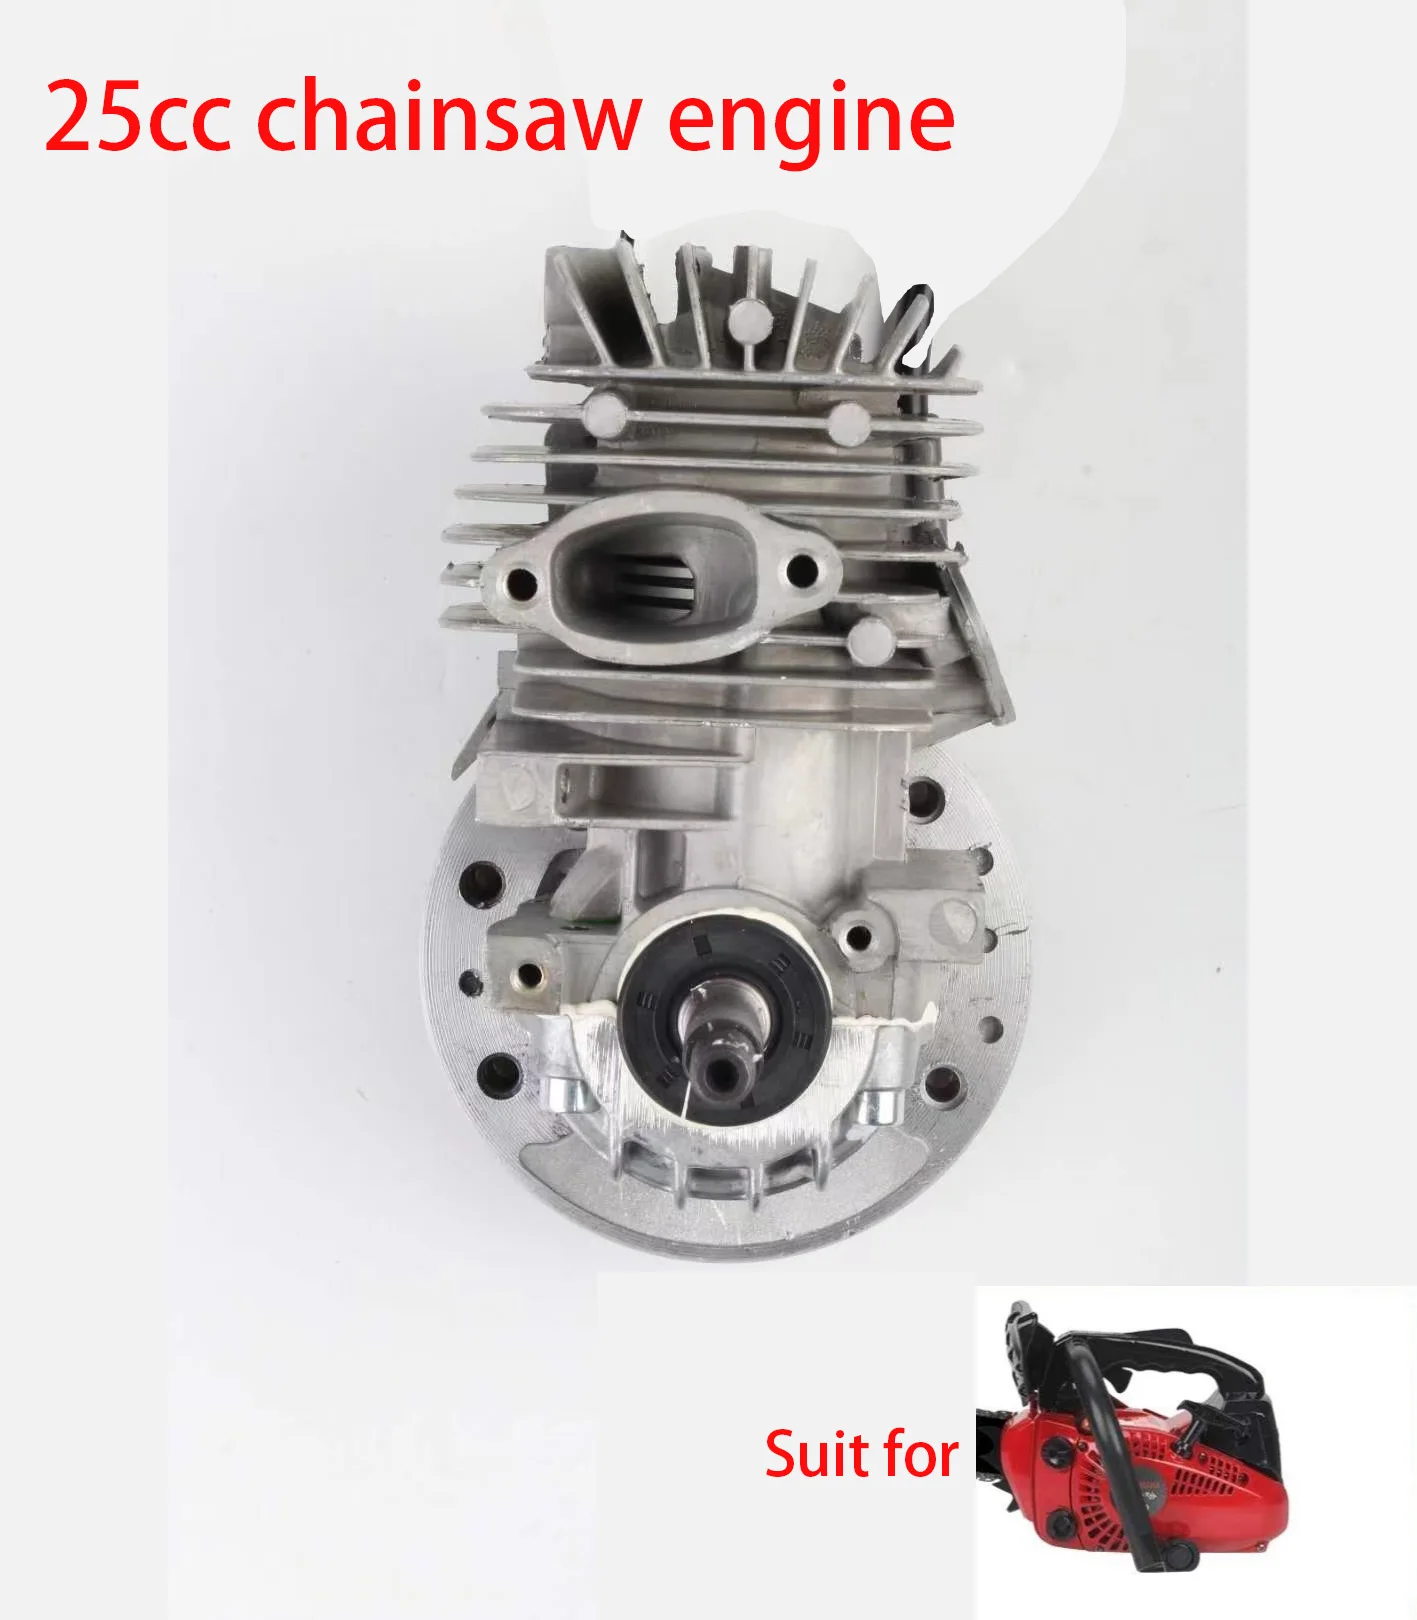 Whole Complete Engine Motor Cylinder Crankshaft Assembly For 25cc G2500 Top Handle Gasoline Chainsaw Pruner one cylinder four stroke air cooled motorbike engine gasoline motorcycle assembly engine for 150cc 200cccustom